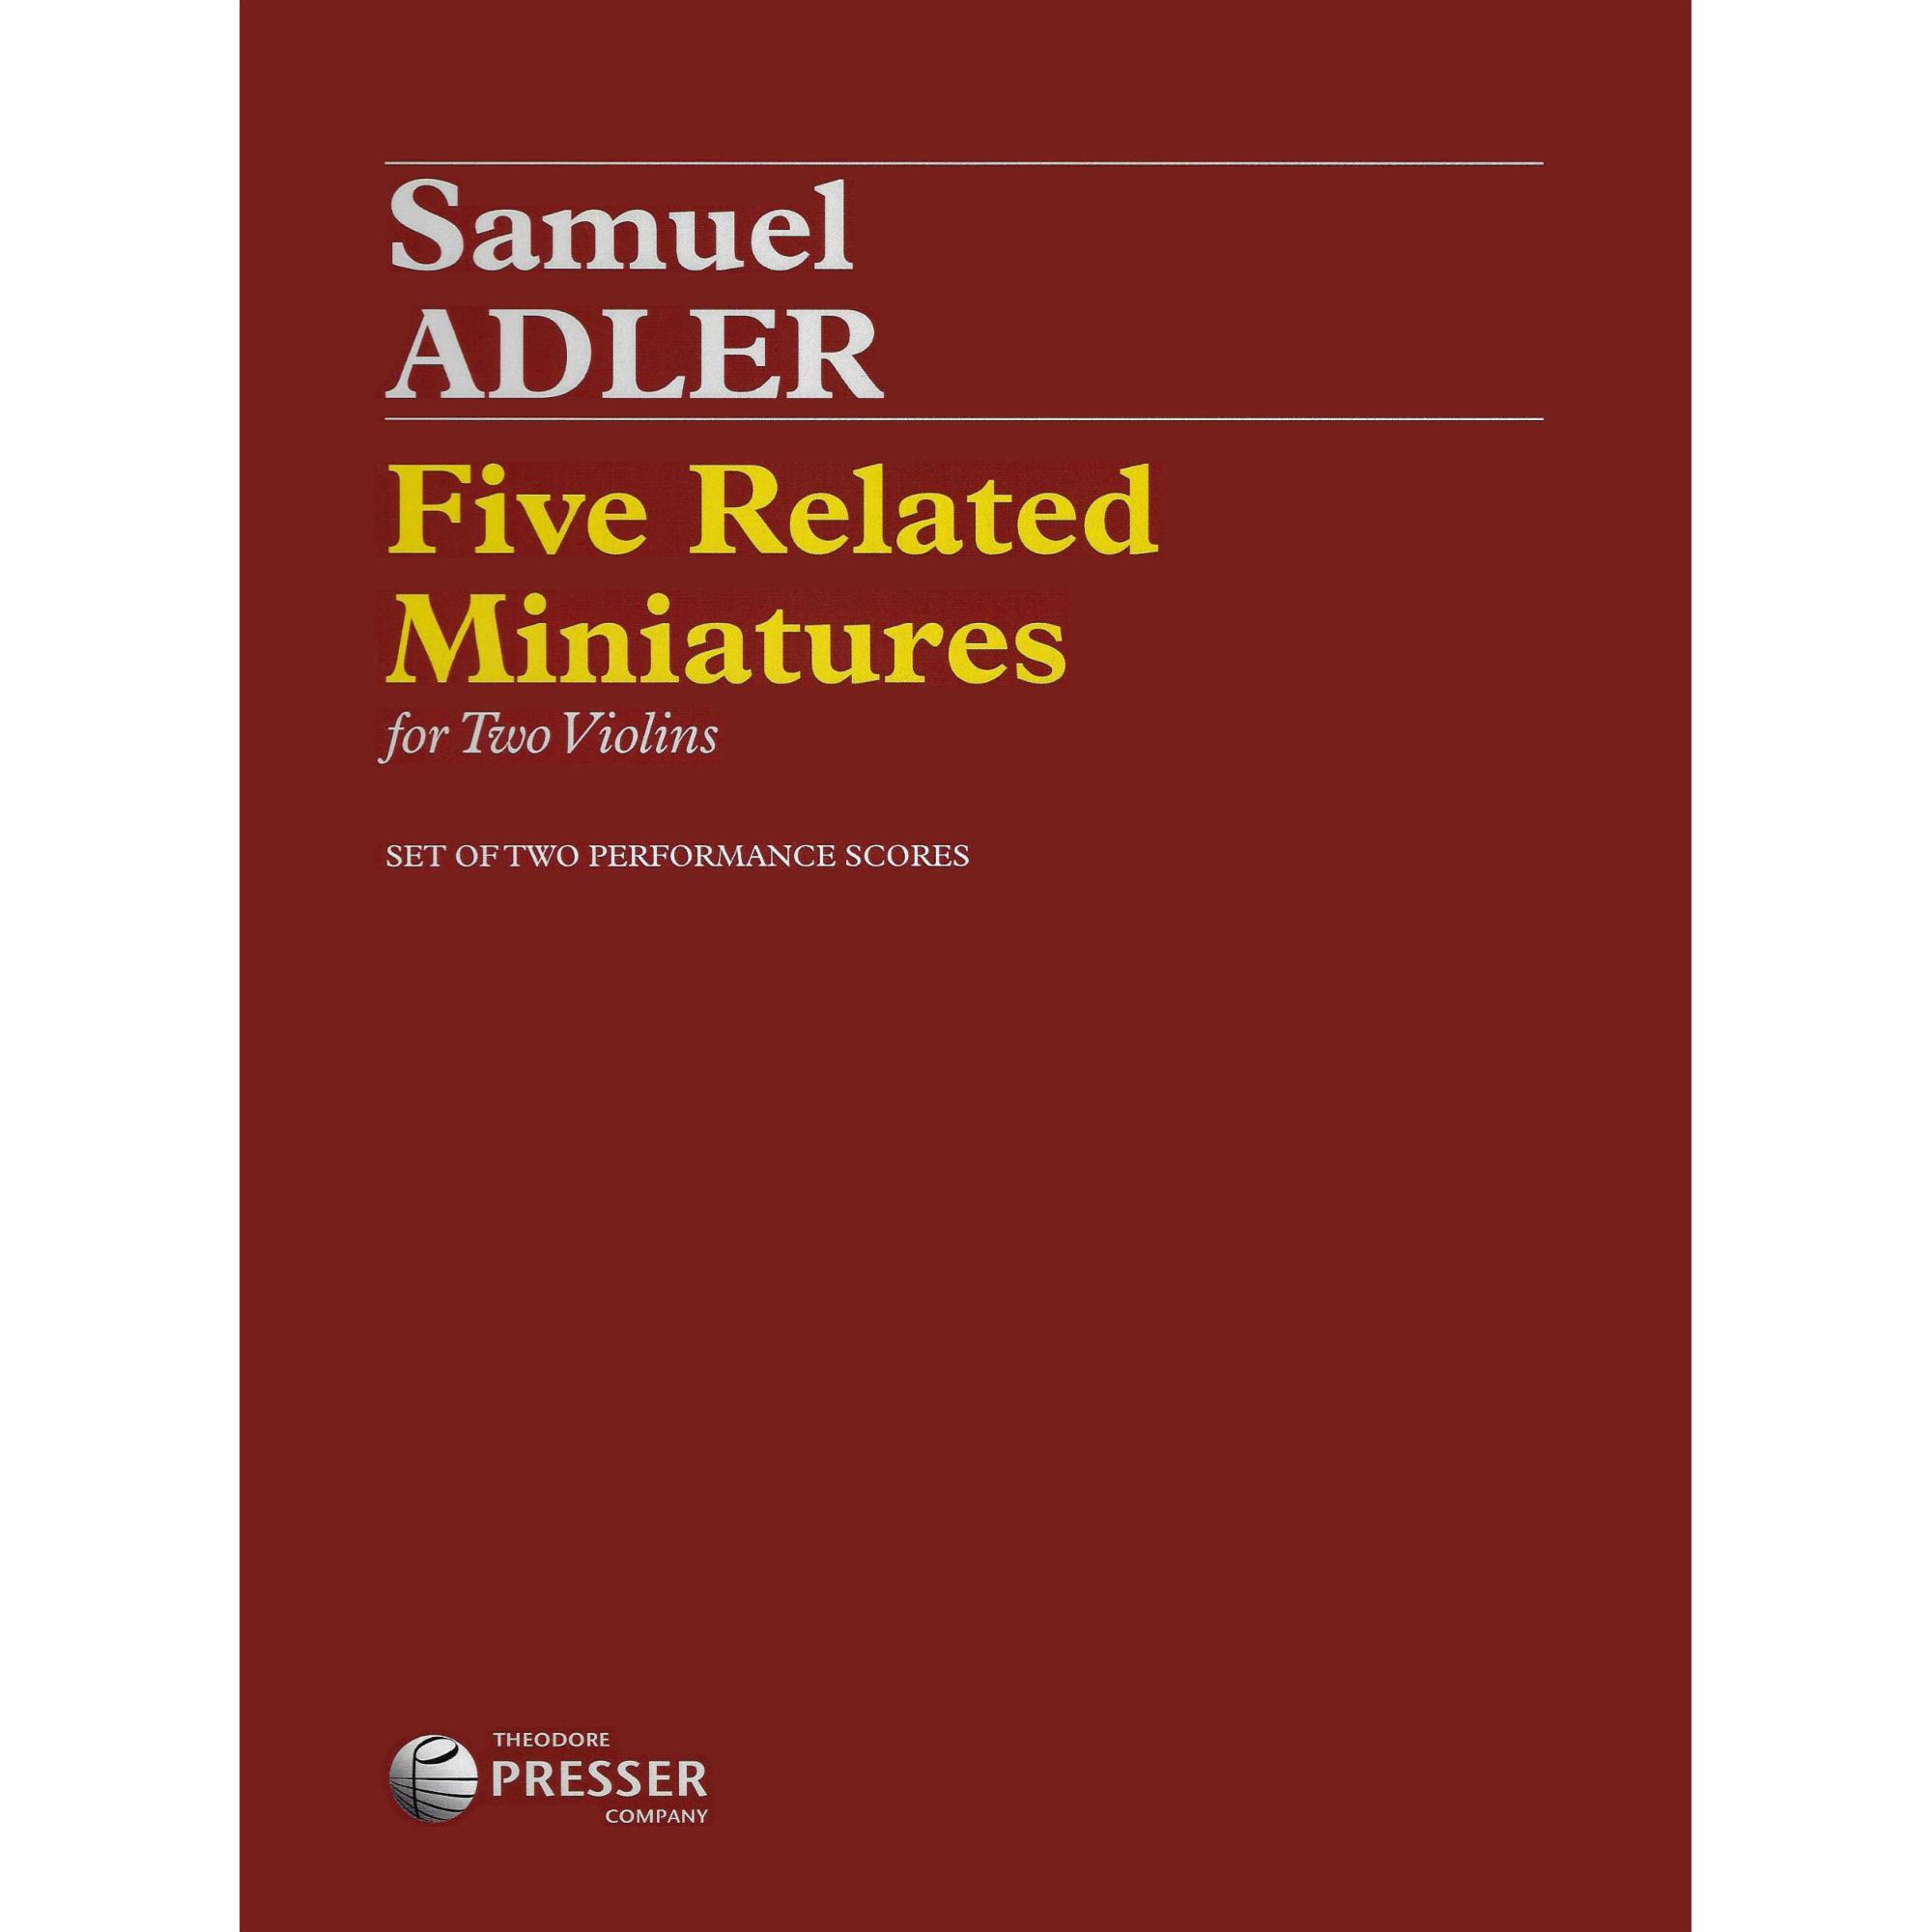 Adler -- Five Related Miniatures for Two Violins